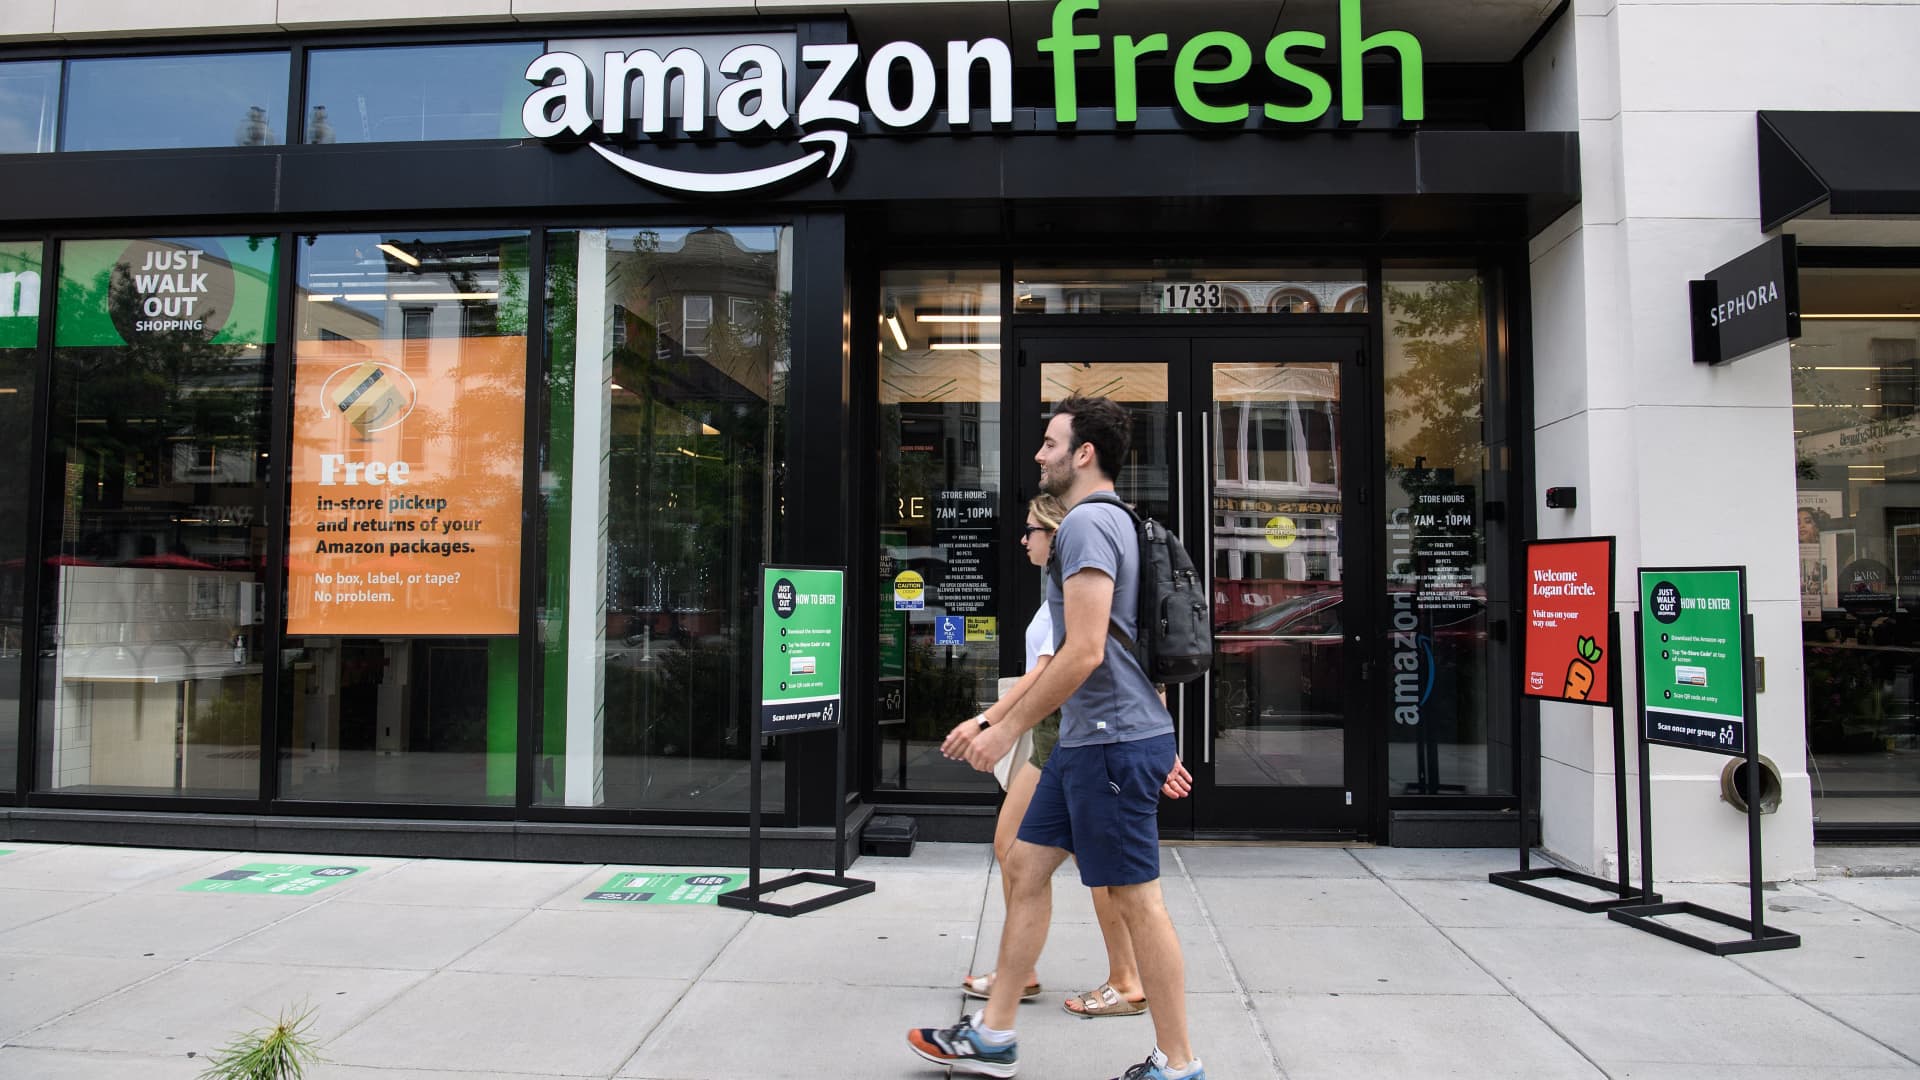 Amazon cuts jobs at Fresh grocery stores